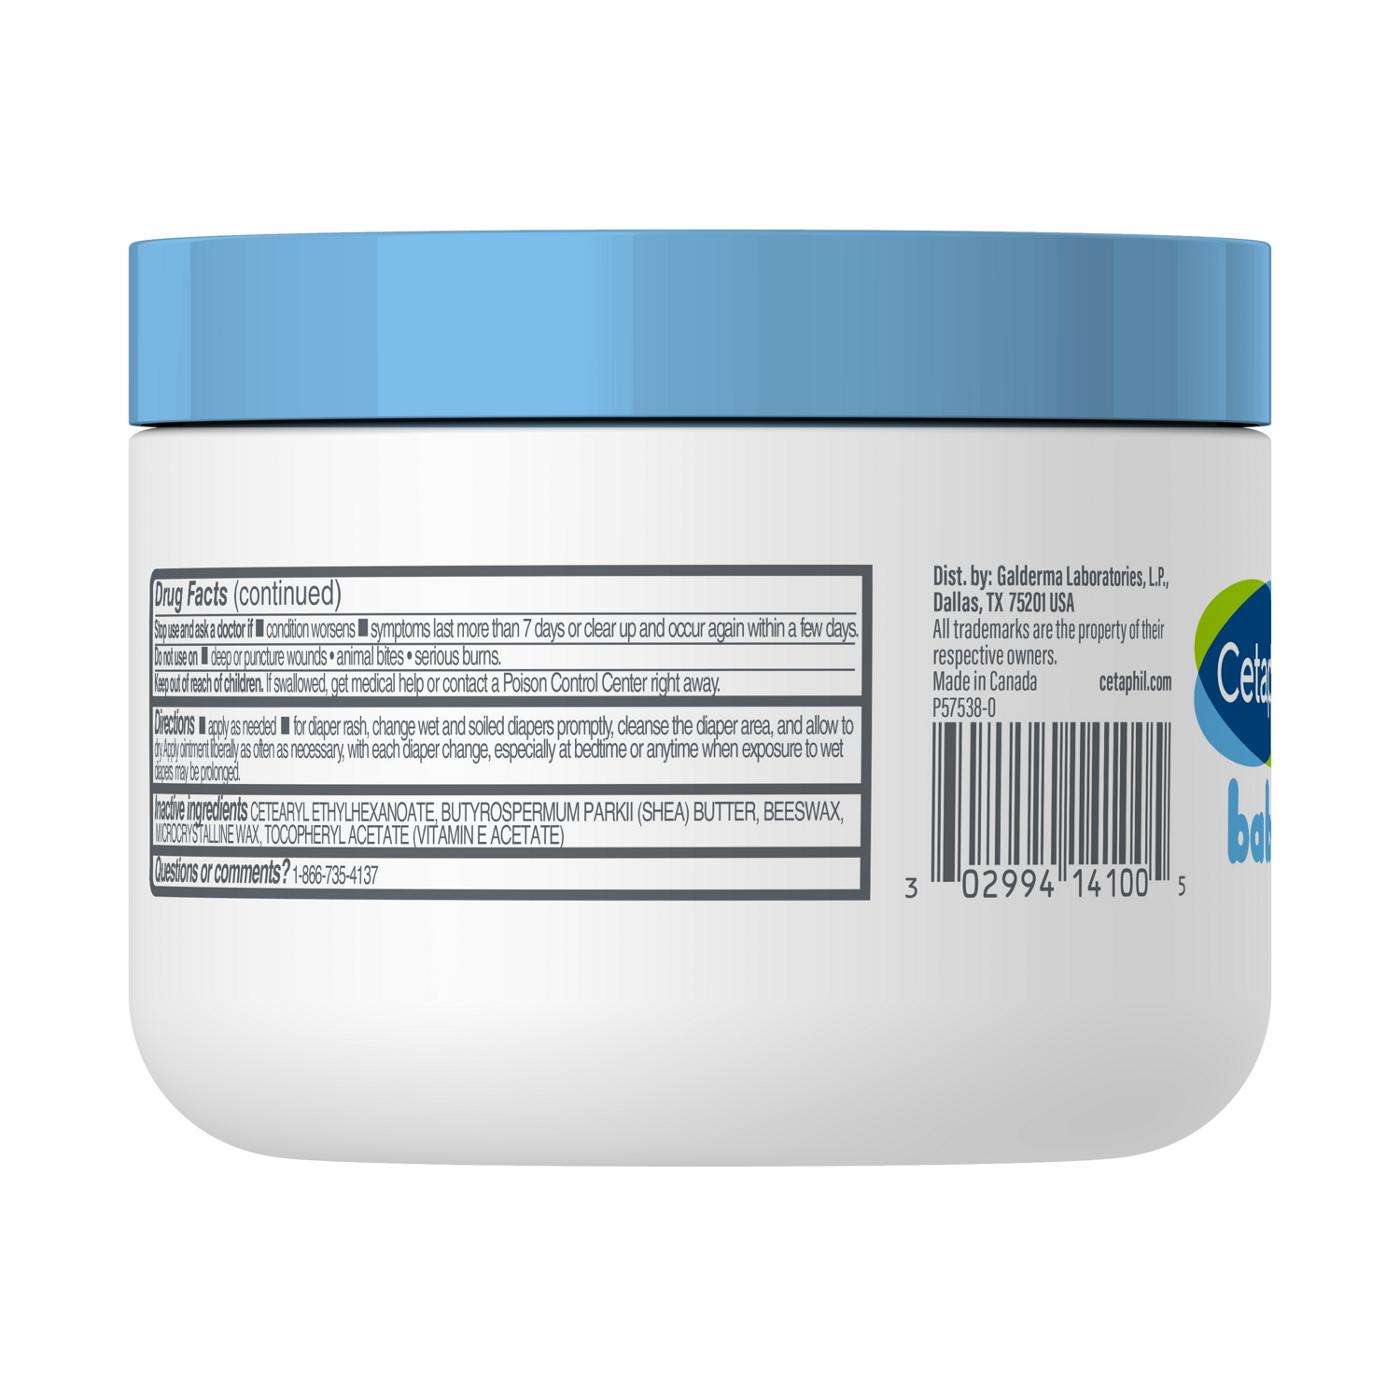 Cetaphil Baby Healing Ointment; image 3 of 3